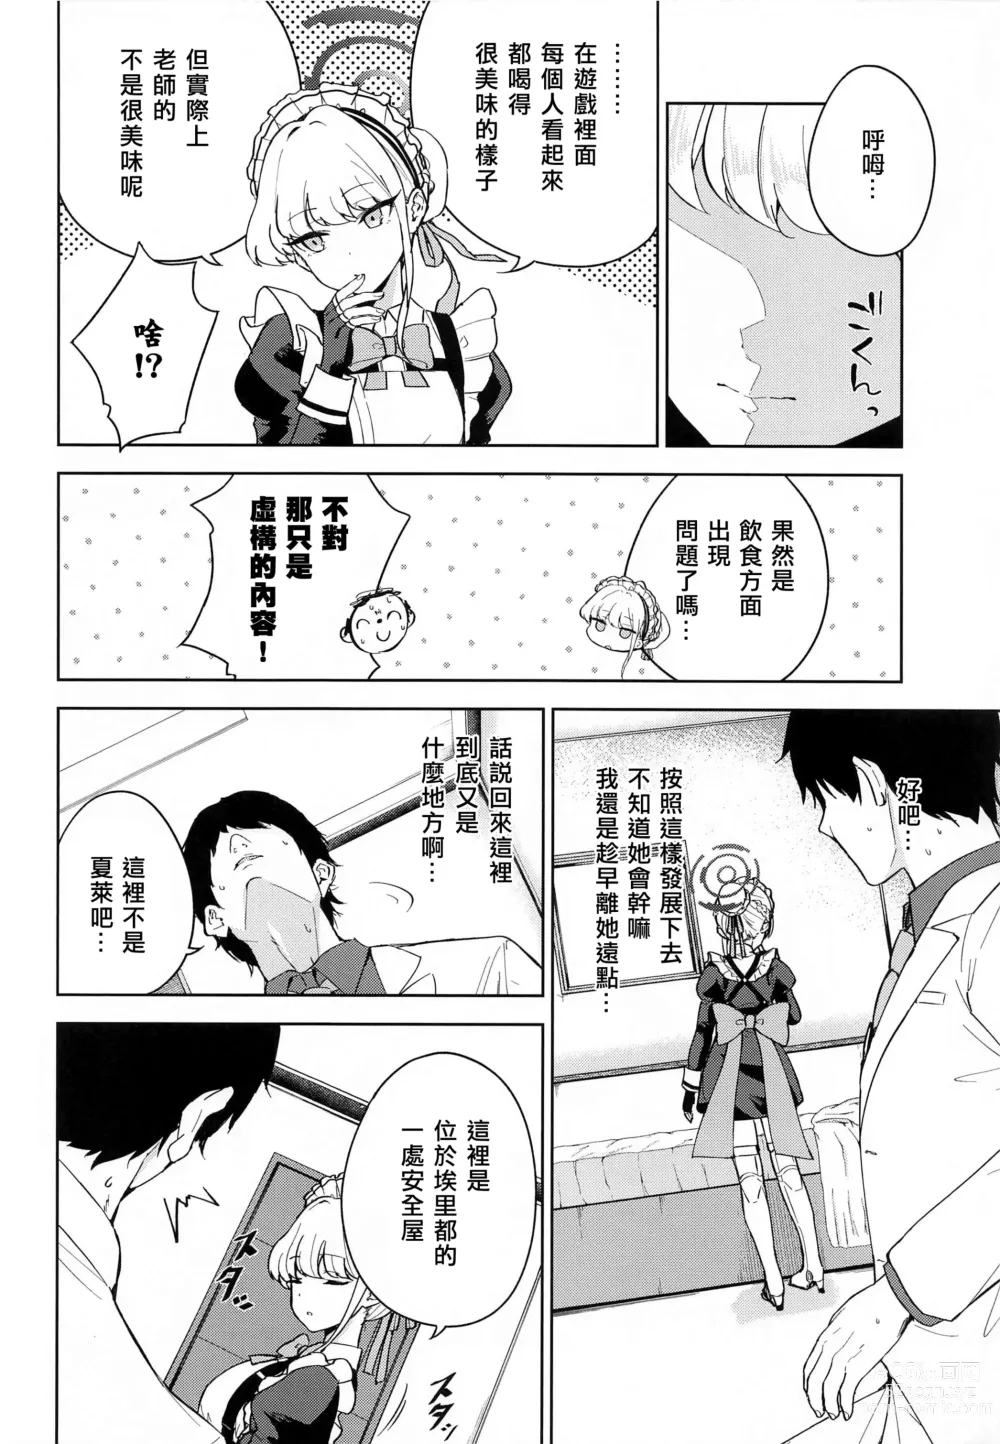 Page 7 of doujinshi Made in Maid